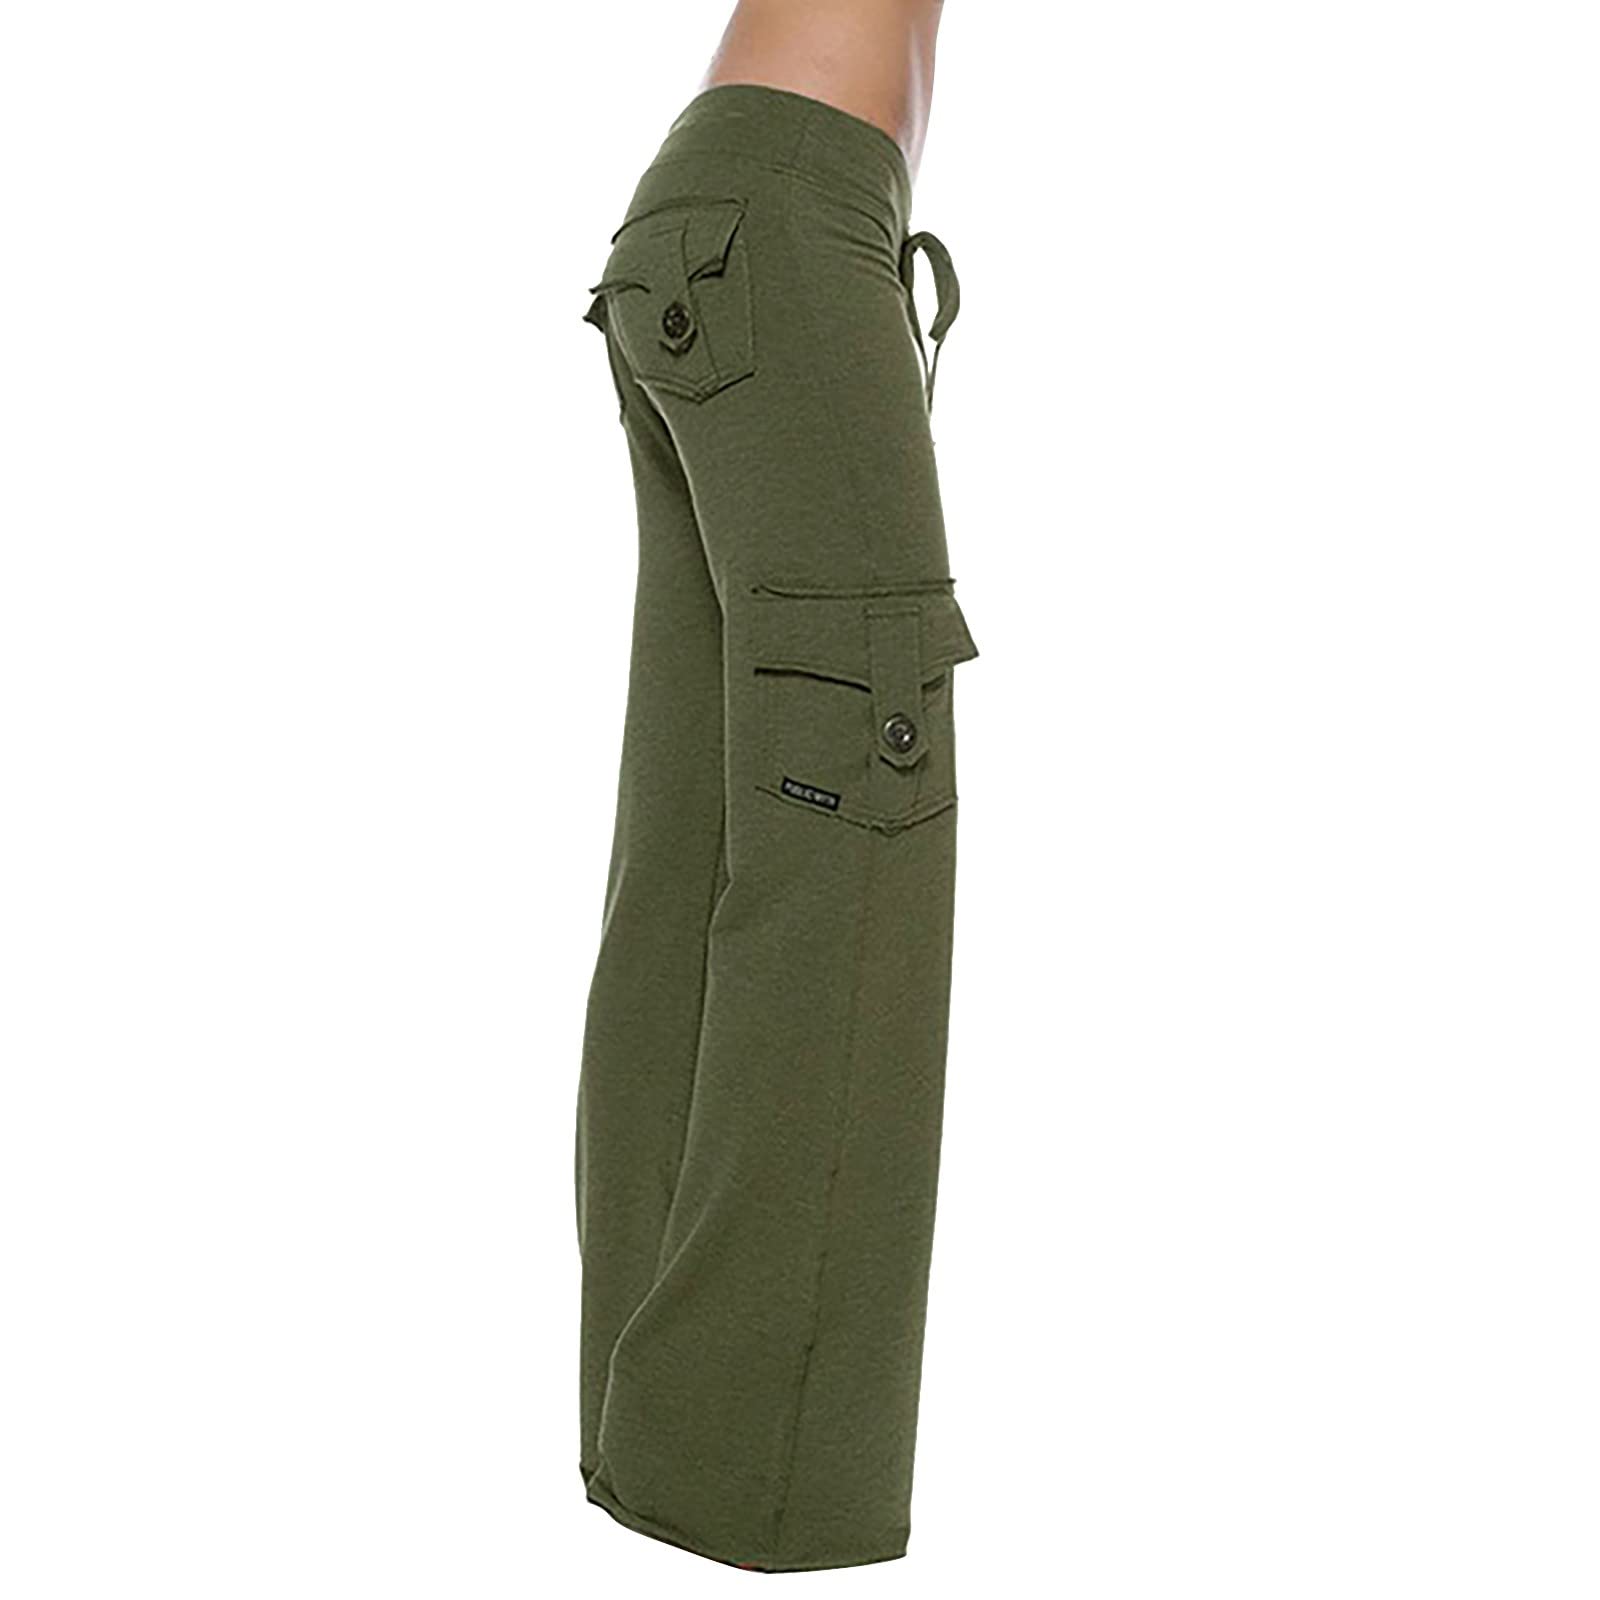 Women's Soft Cargo Pants Casual Workout Wide Leg High Waist Cargo Yoga Pants  with Pockets Stretch Leggings Gym Sweatpants